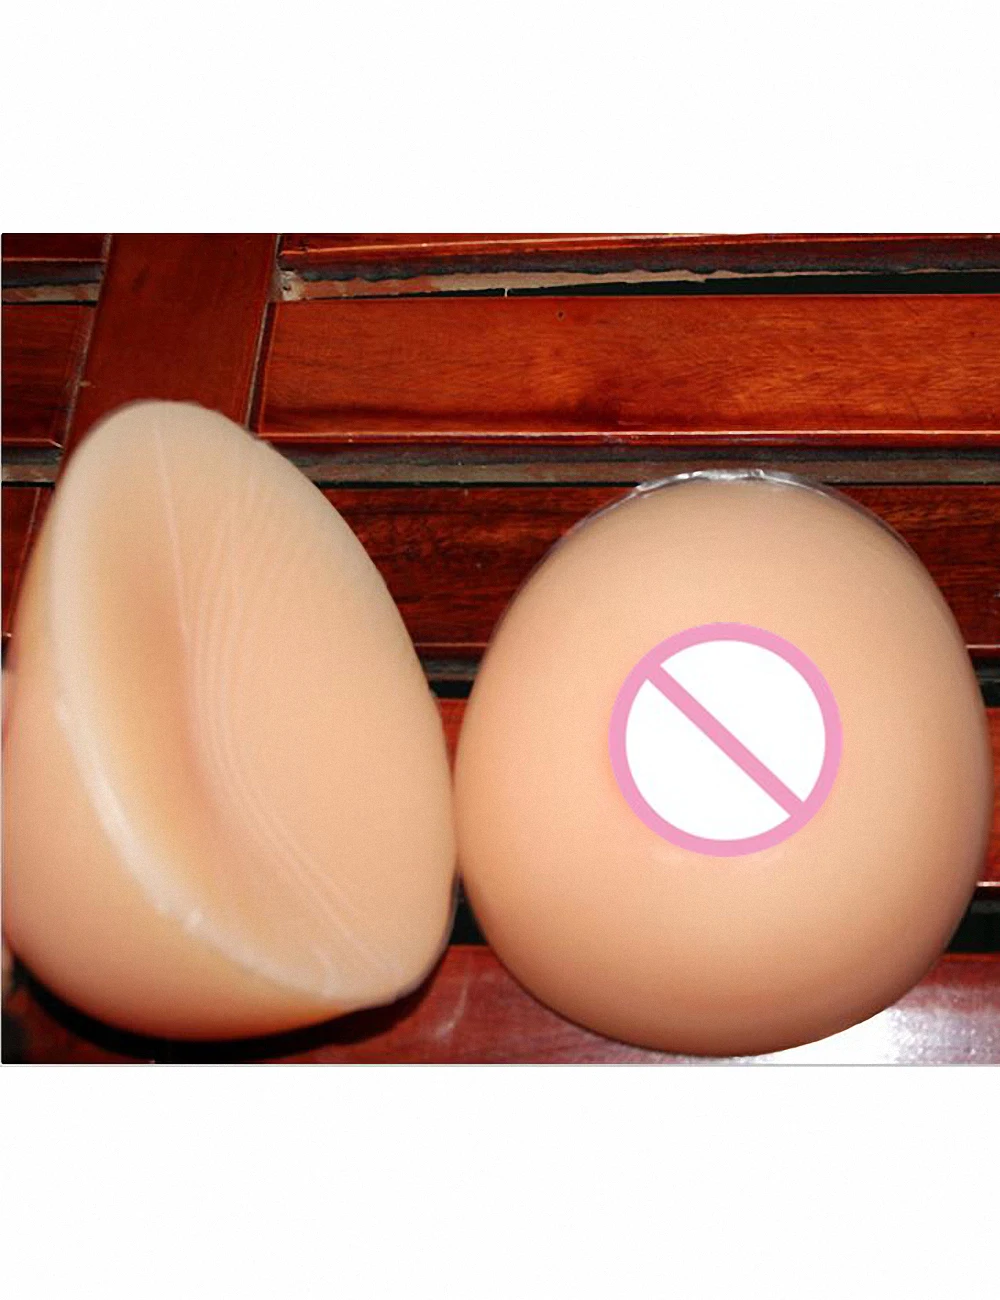 Full Teardrop Shape 2000G H Cup False Silicone Breast Form Artificial Boob Enhancer Sexy Tit Bust Chest For Men Crossdresser